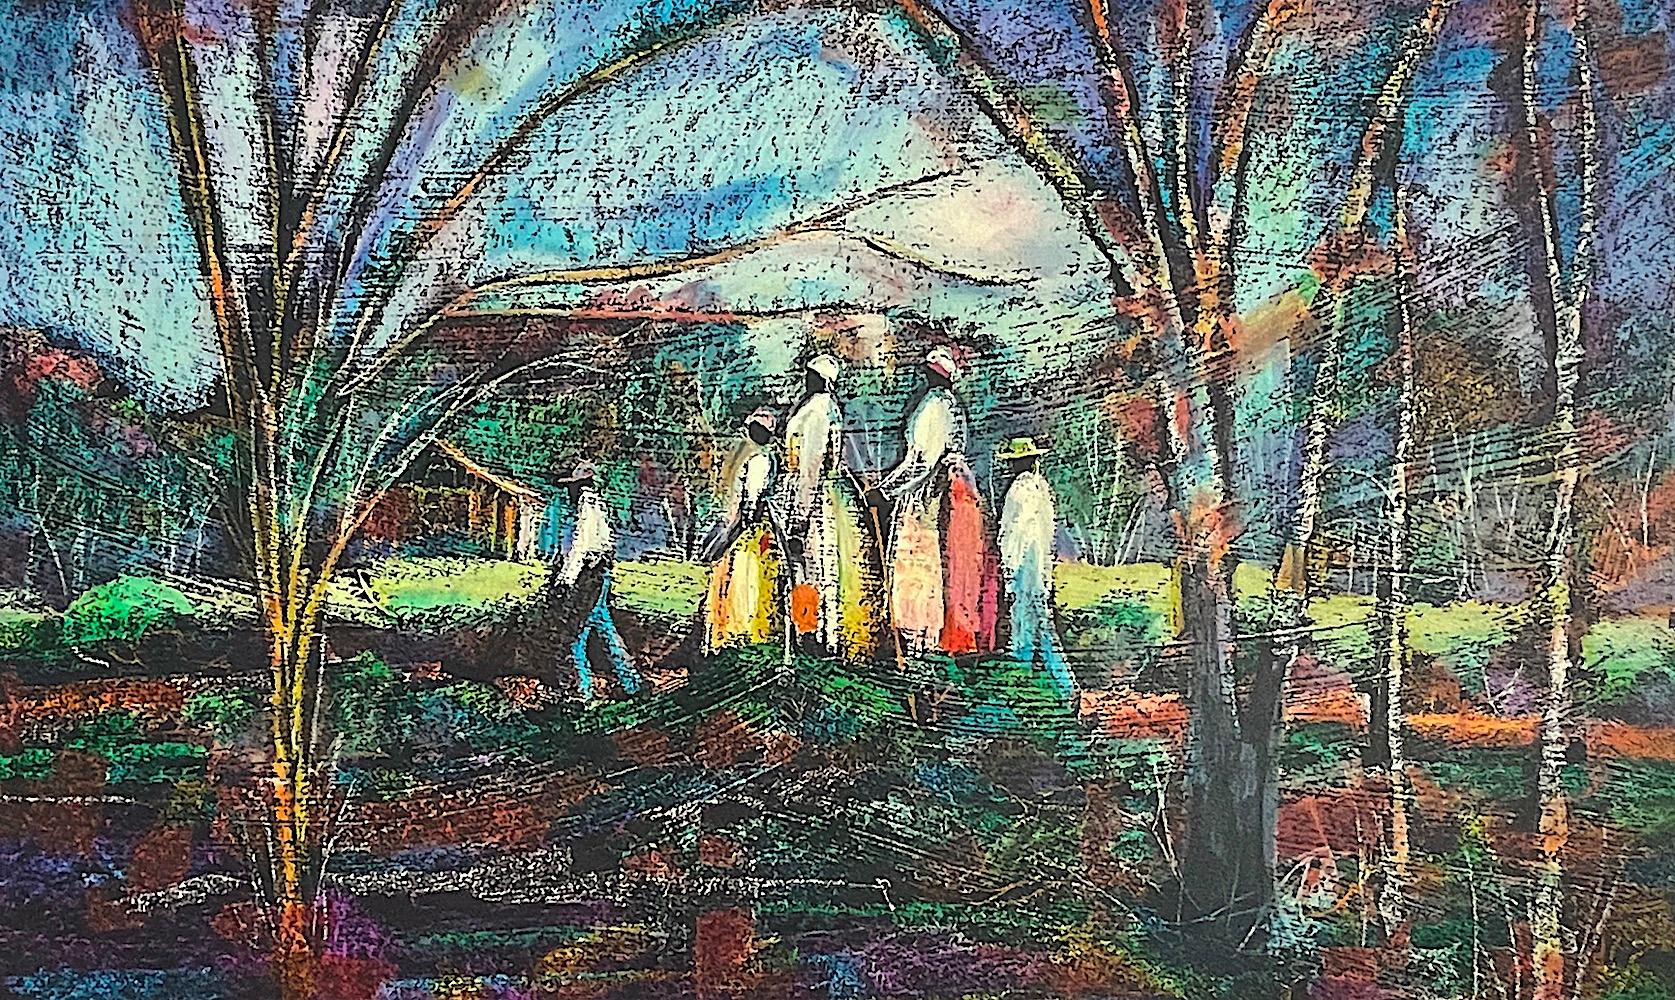 GOING TO CHURCH Signed Lithograph, Southern Landscape, African American Heritage - Print by William Tolliver